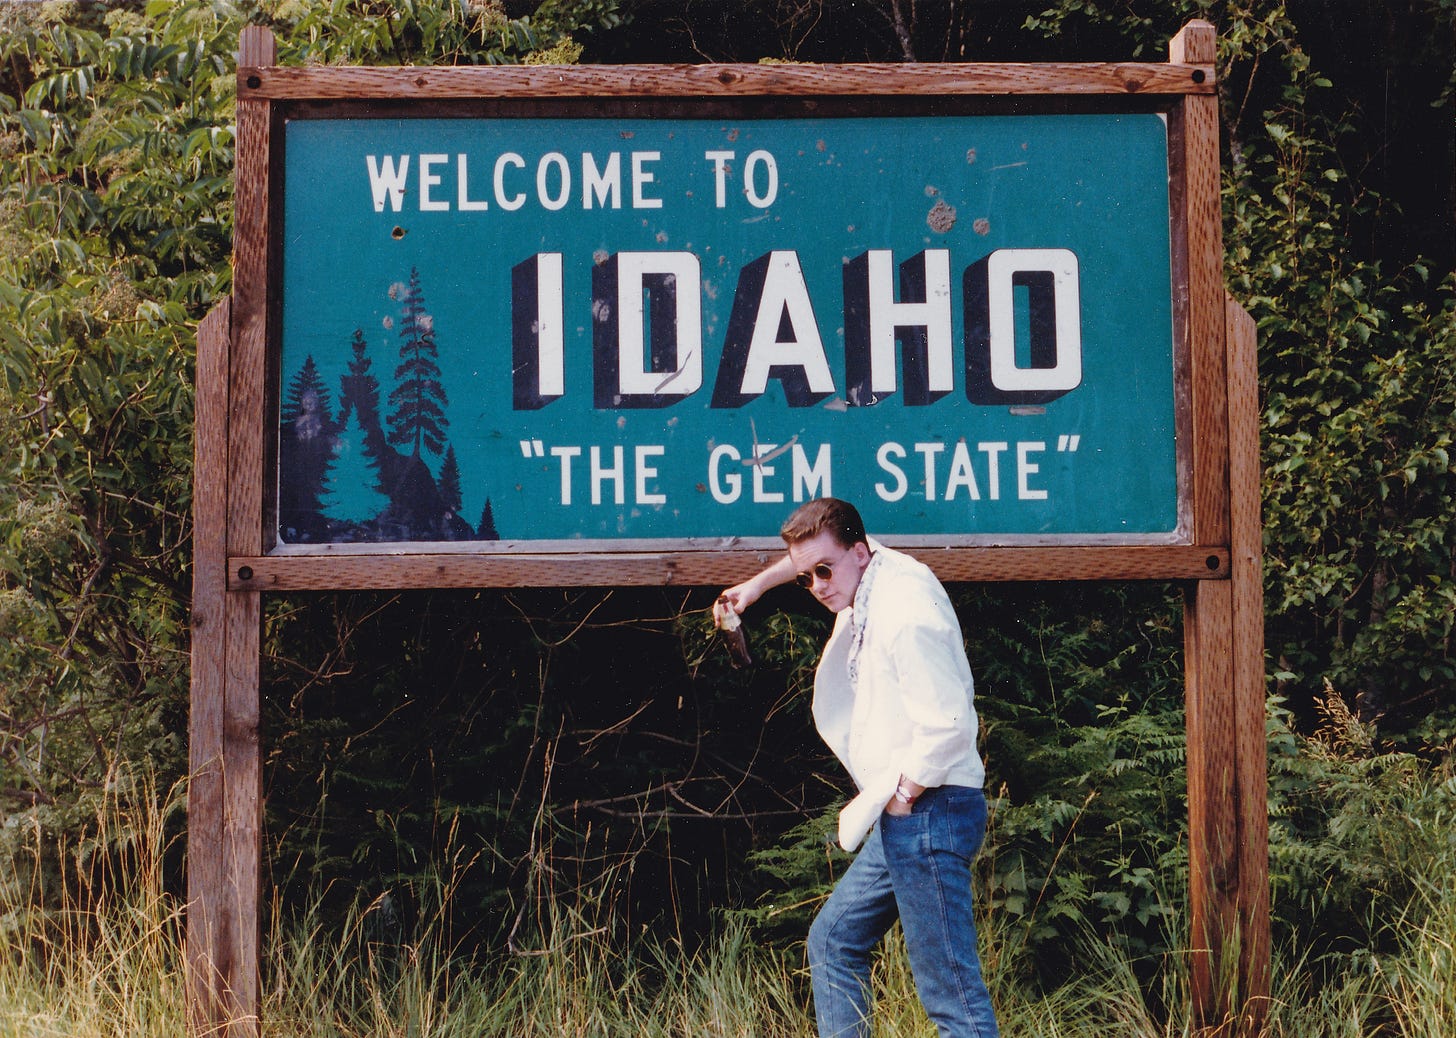 A young white man wearing sunglasses, a white blazer, and jeans, poses insolently leaning against a huge "Welcome to Idaho, The Gem State" sign, against a background of trees and undergrowth. He holds a beer bottle.